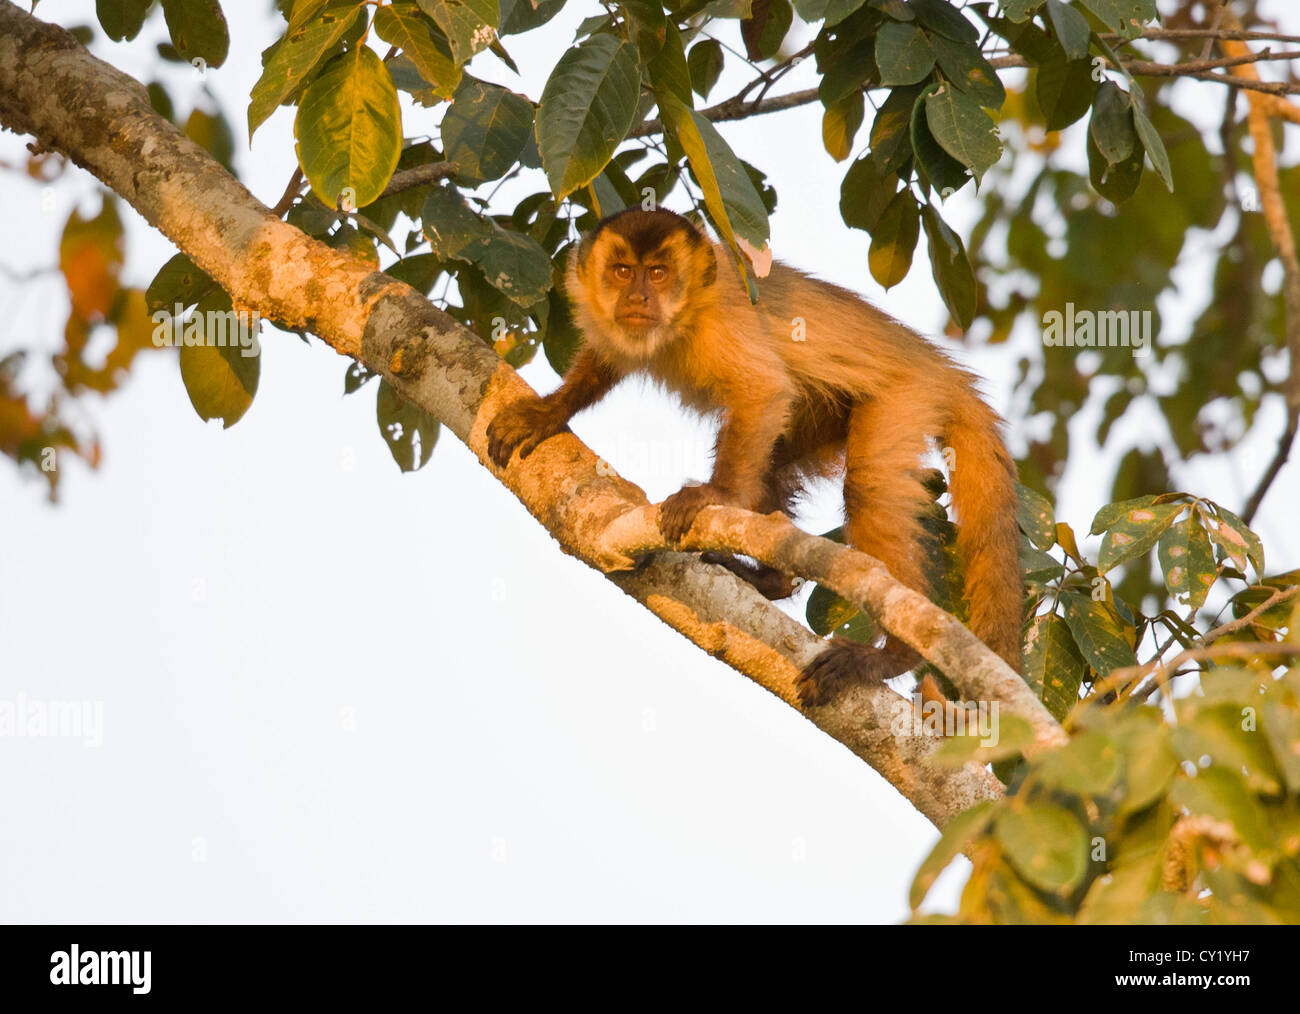 Tufted capuchin (Cebus apella), also known as brown capuchin or black-capped capuchin. Stock Photo